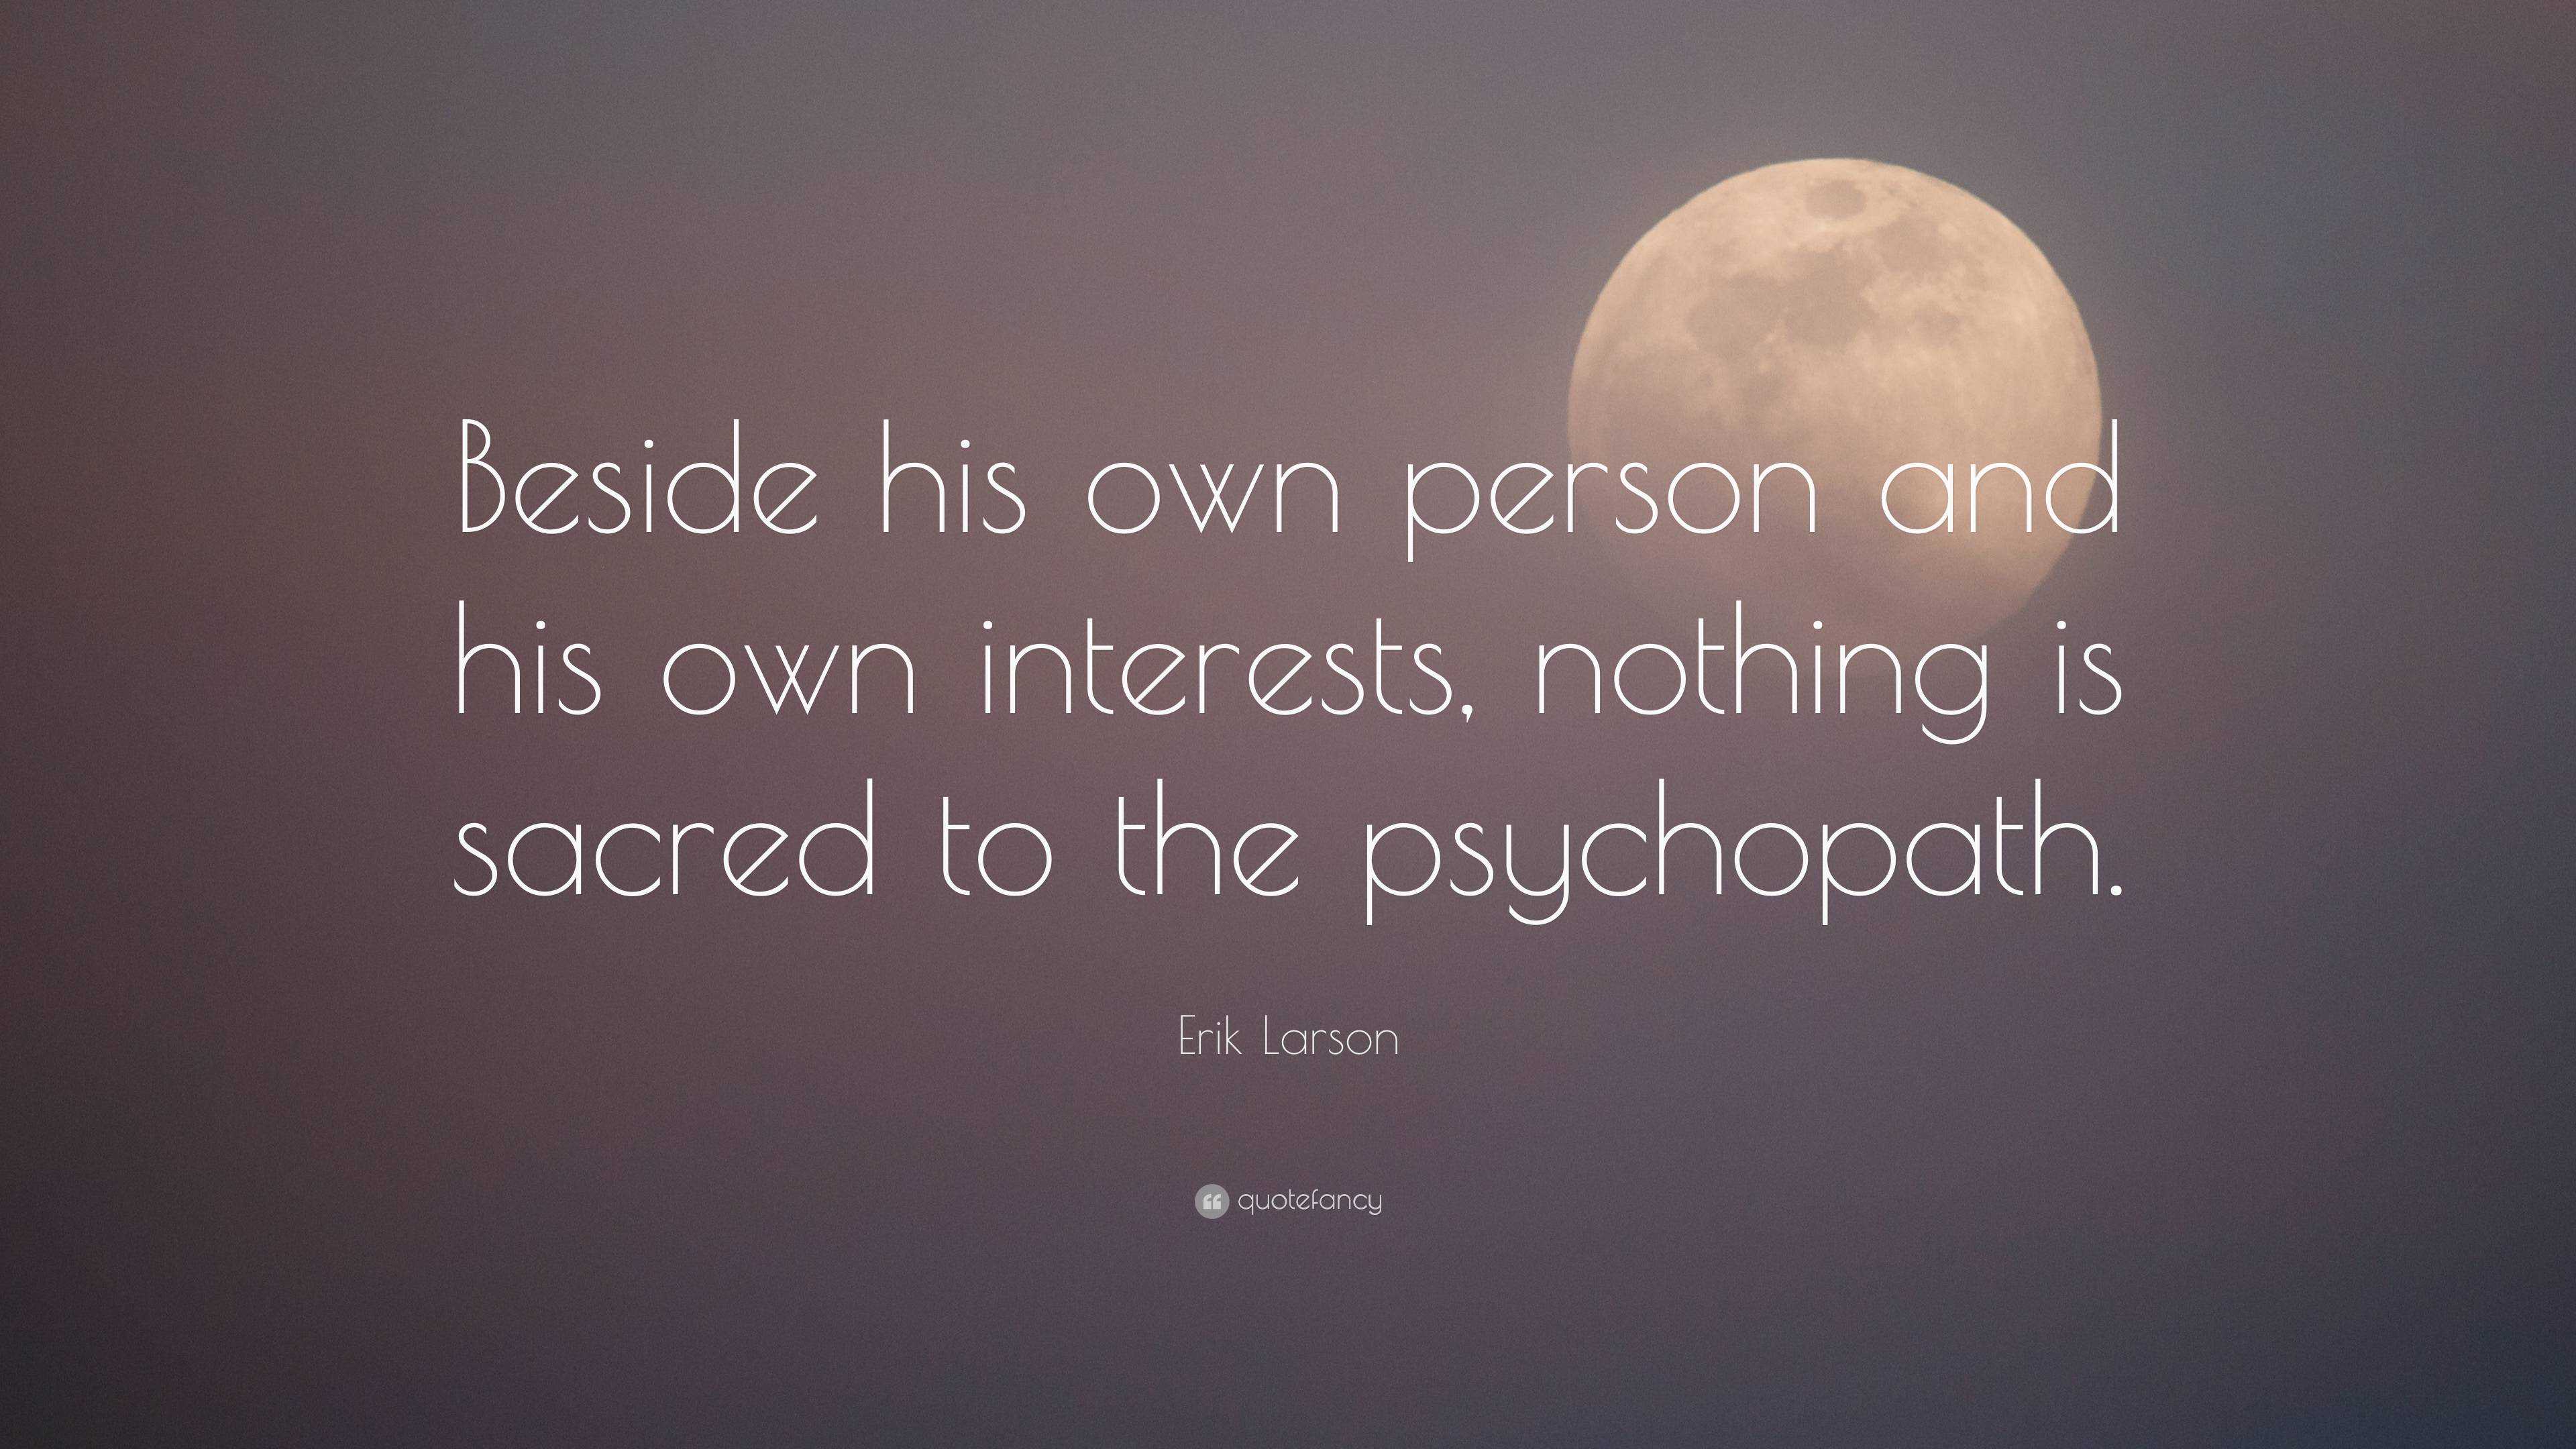 Erik Larson Quote: “Beside his own person and his own interests, nothing is sacred to the psychopath.” (2 wallpapers) - Quotefancy